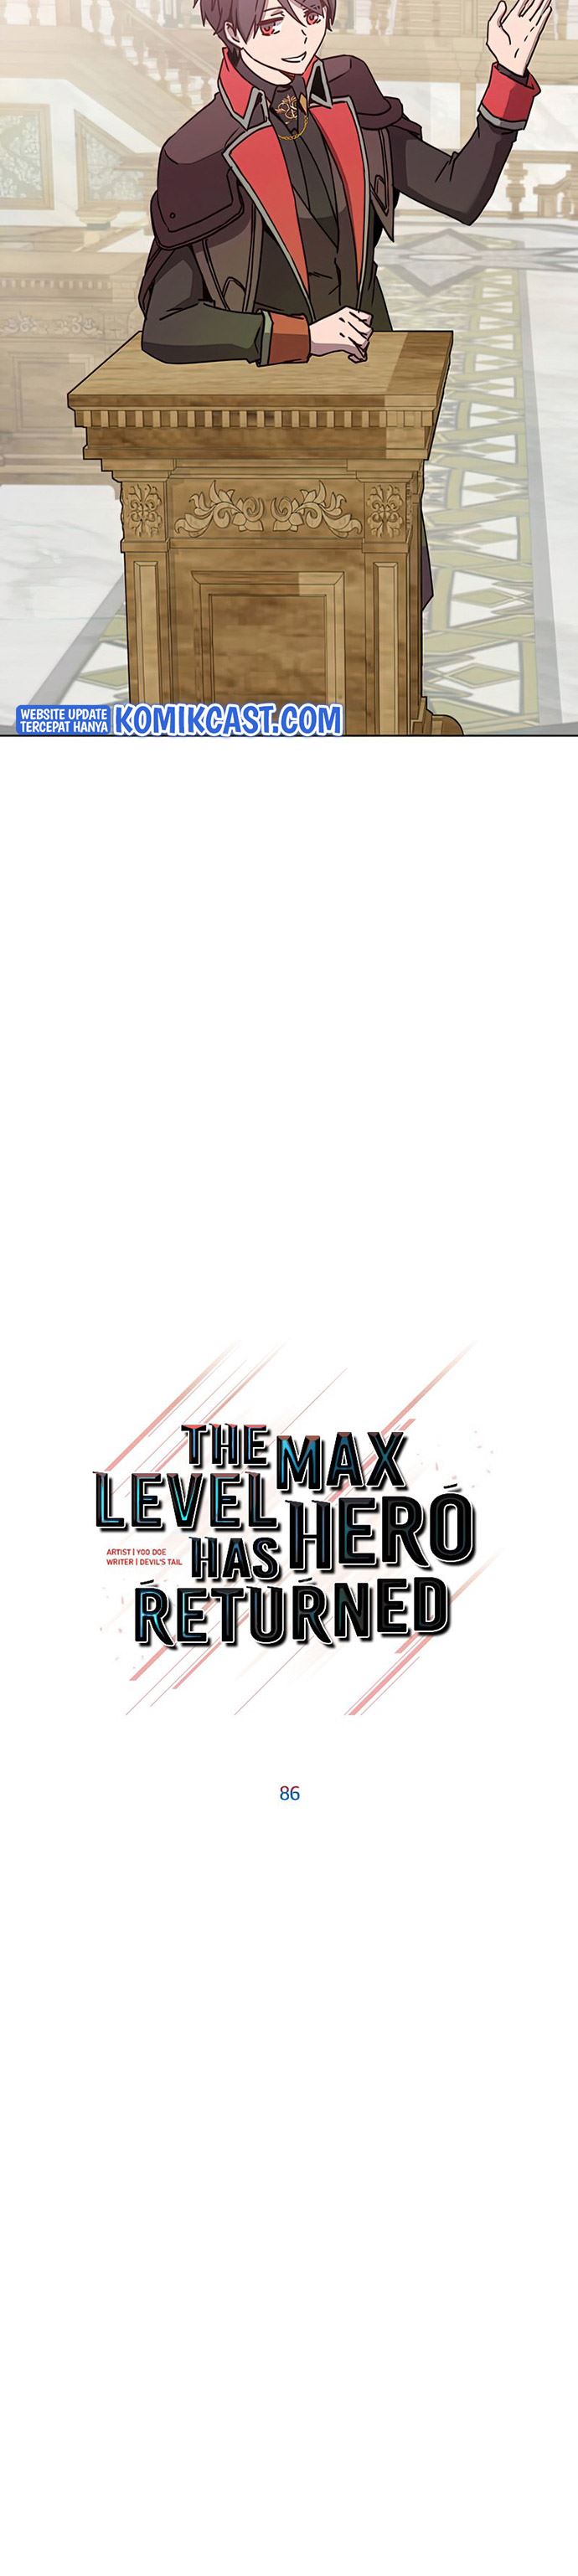 The MAX leveled hero will return! Chapter 86